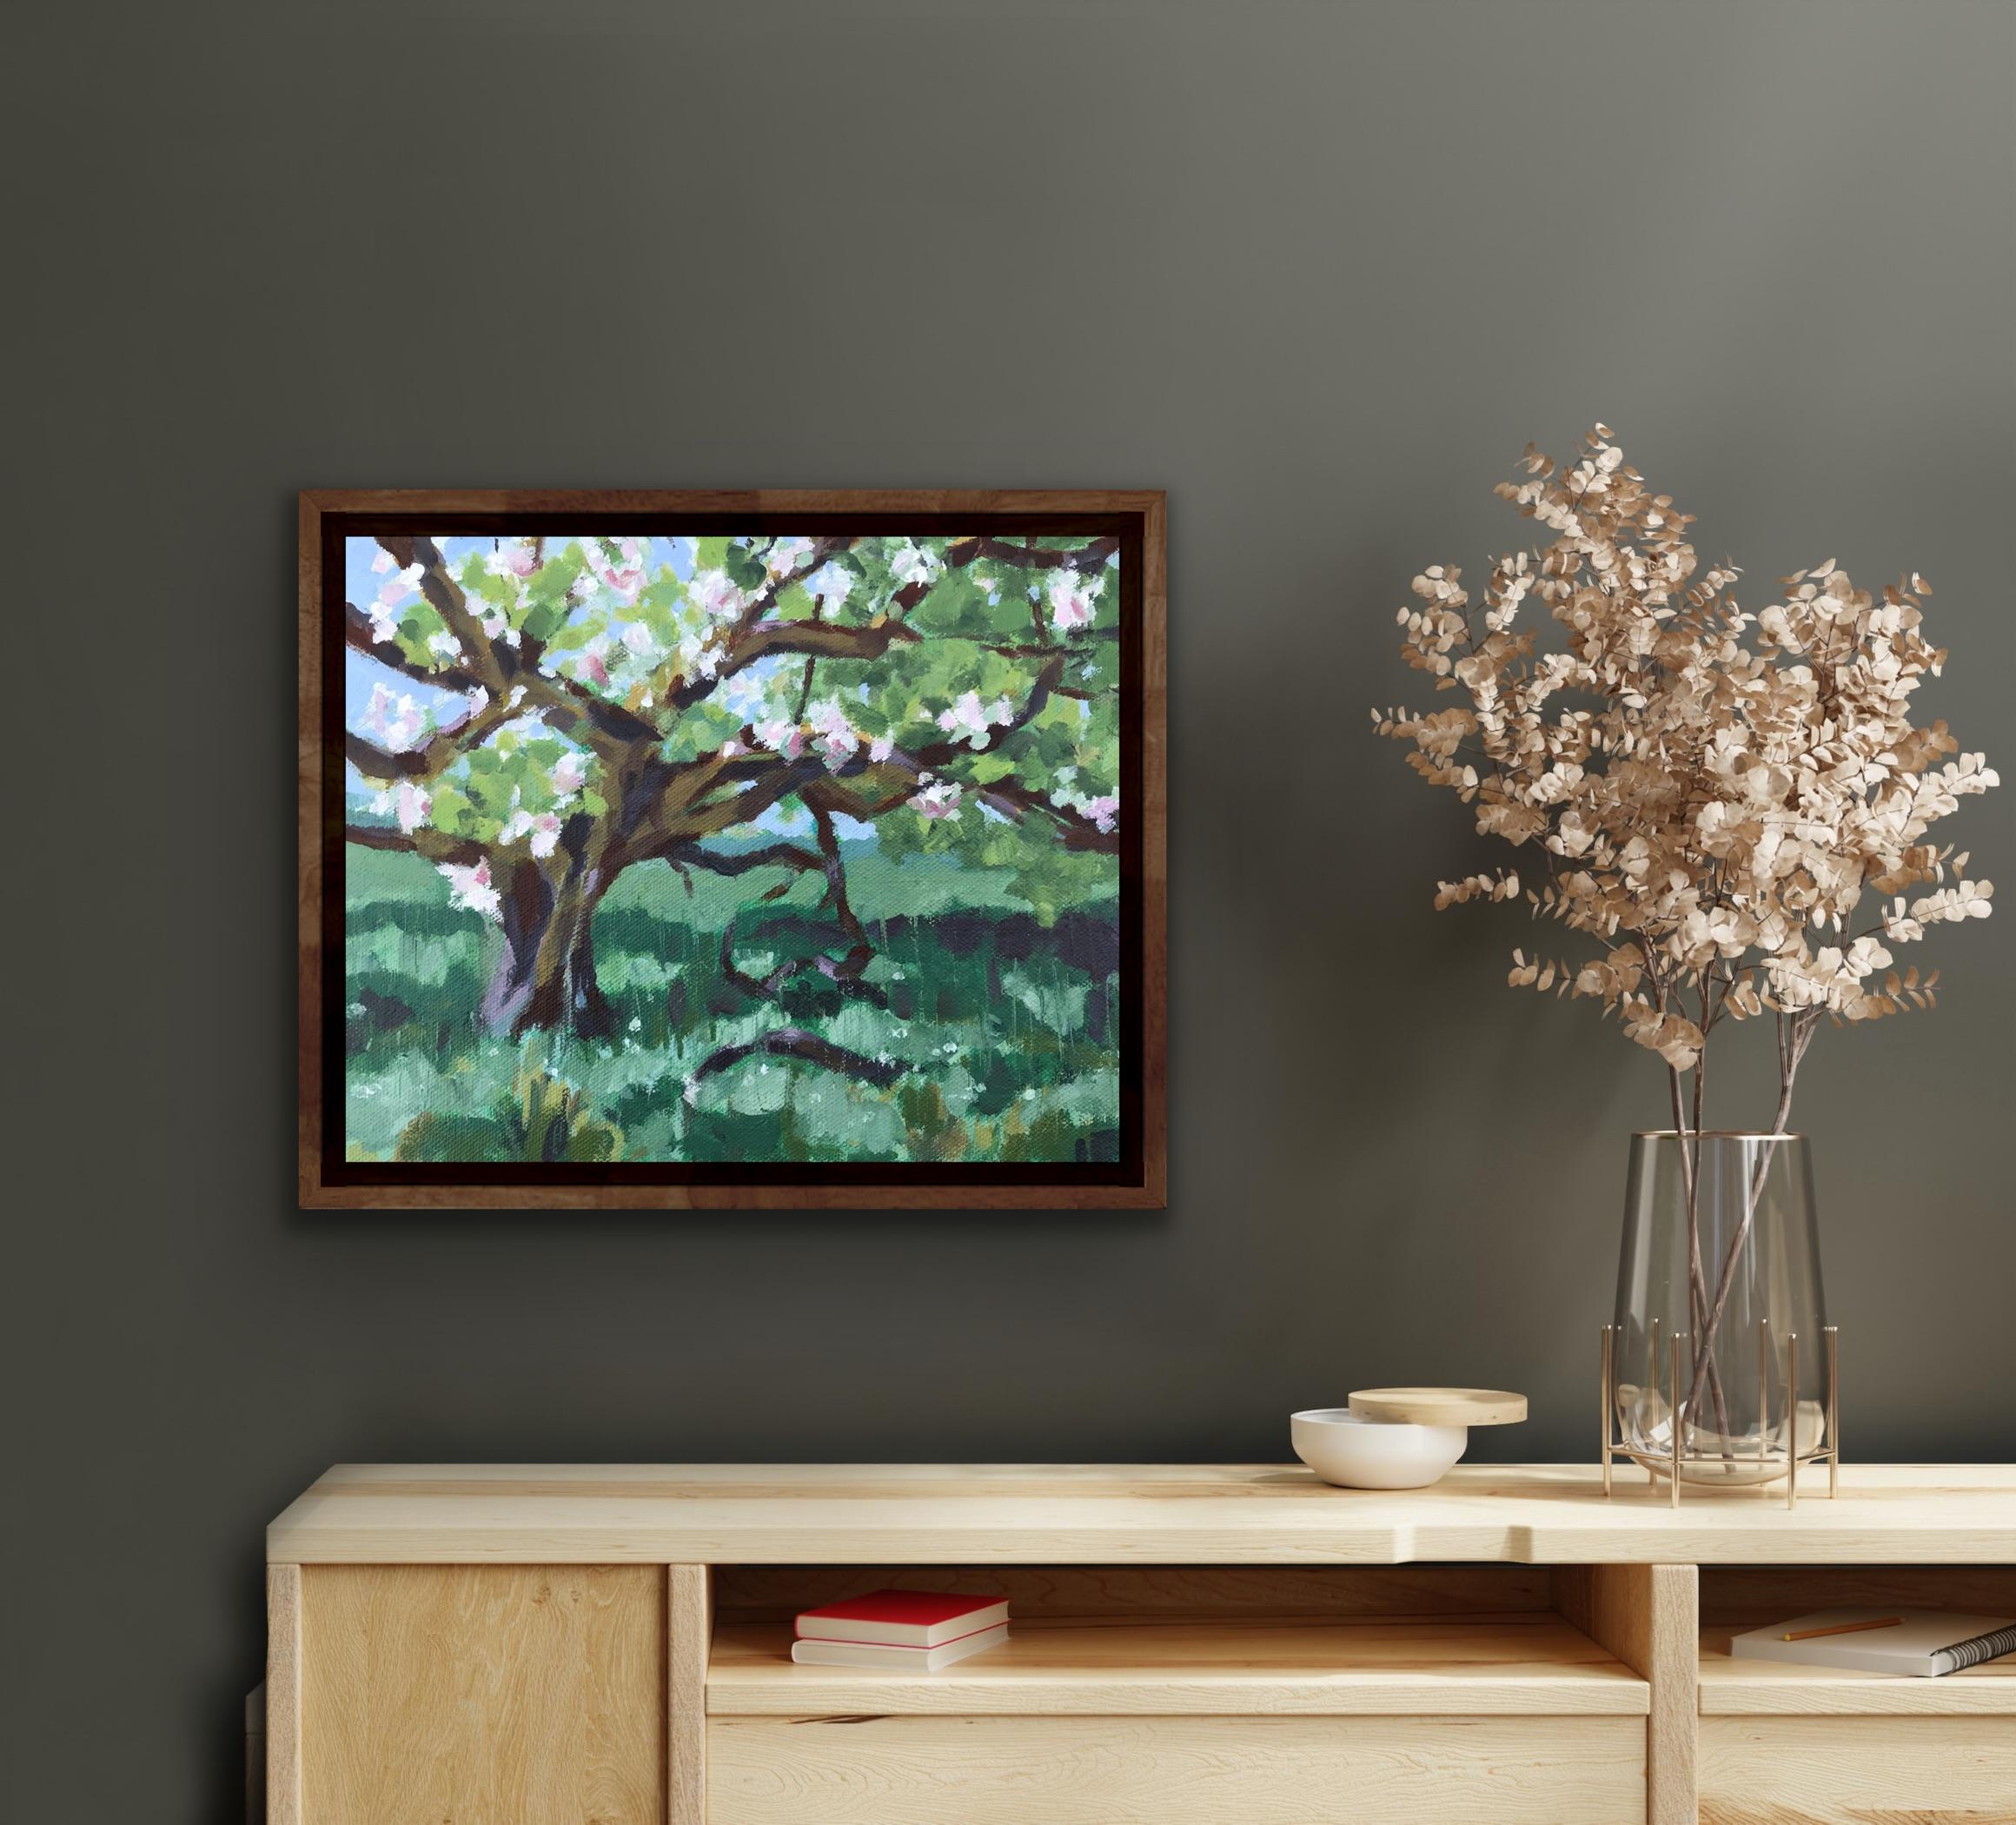 The old Apple Tree, Margaret Crutchley, Landscape art, Original painting  - Painting by Margaret Crutchley 